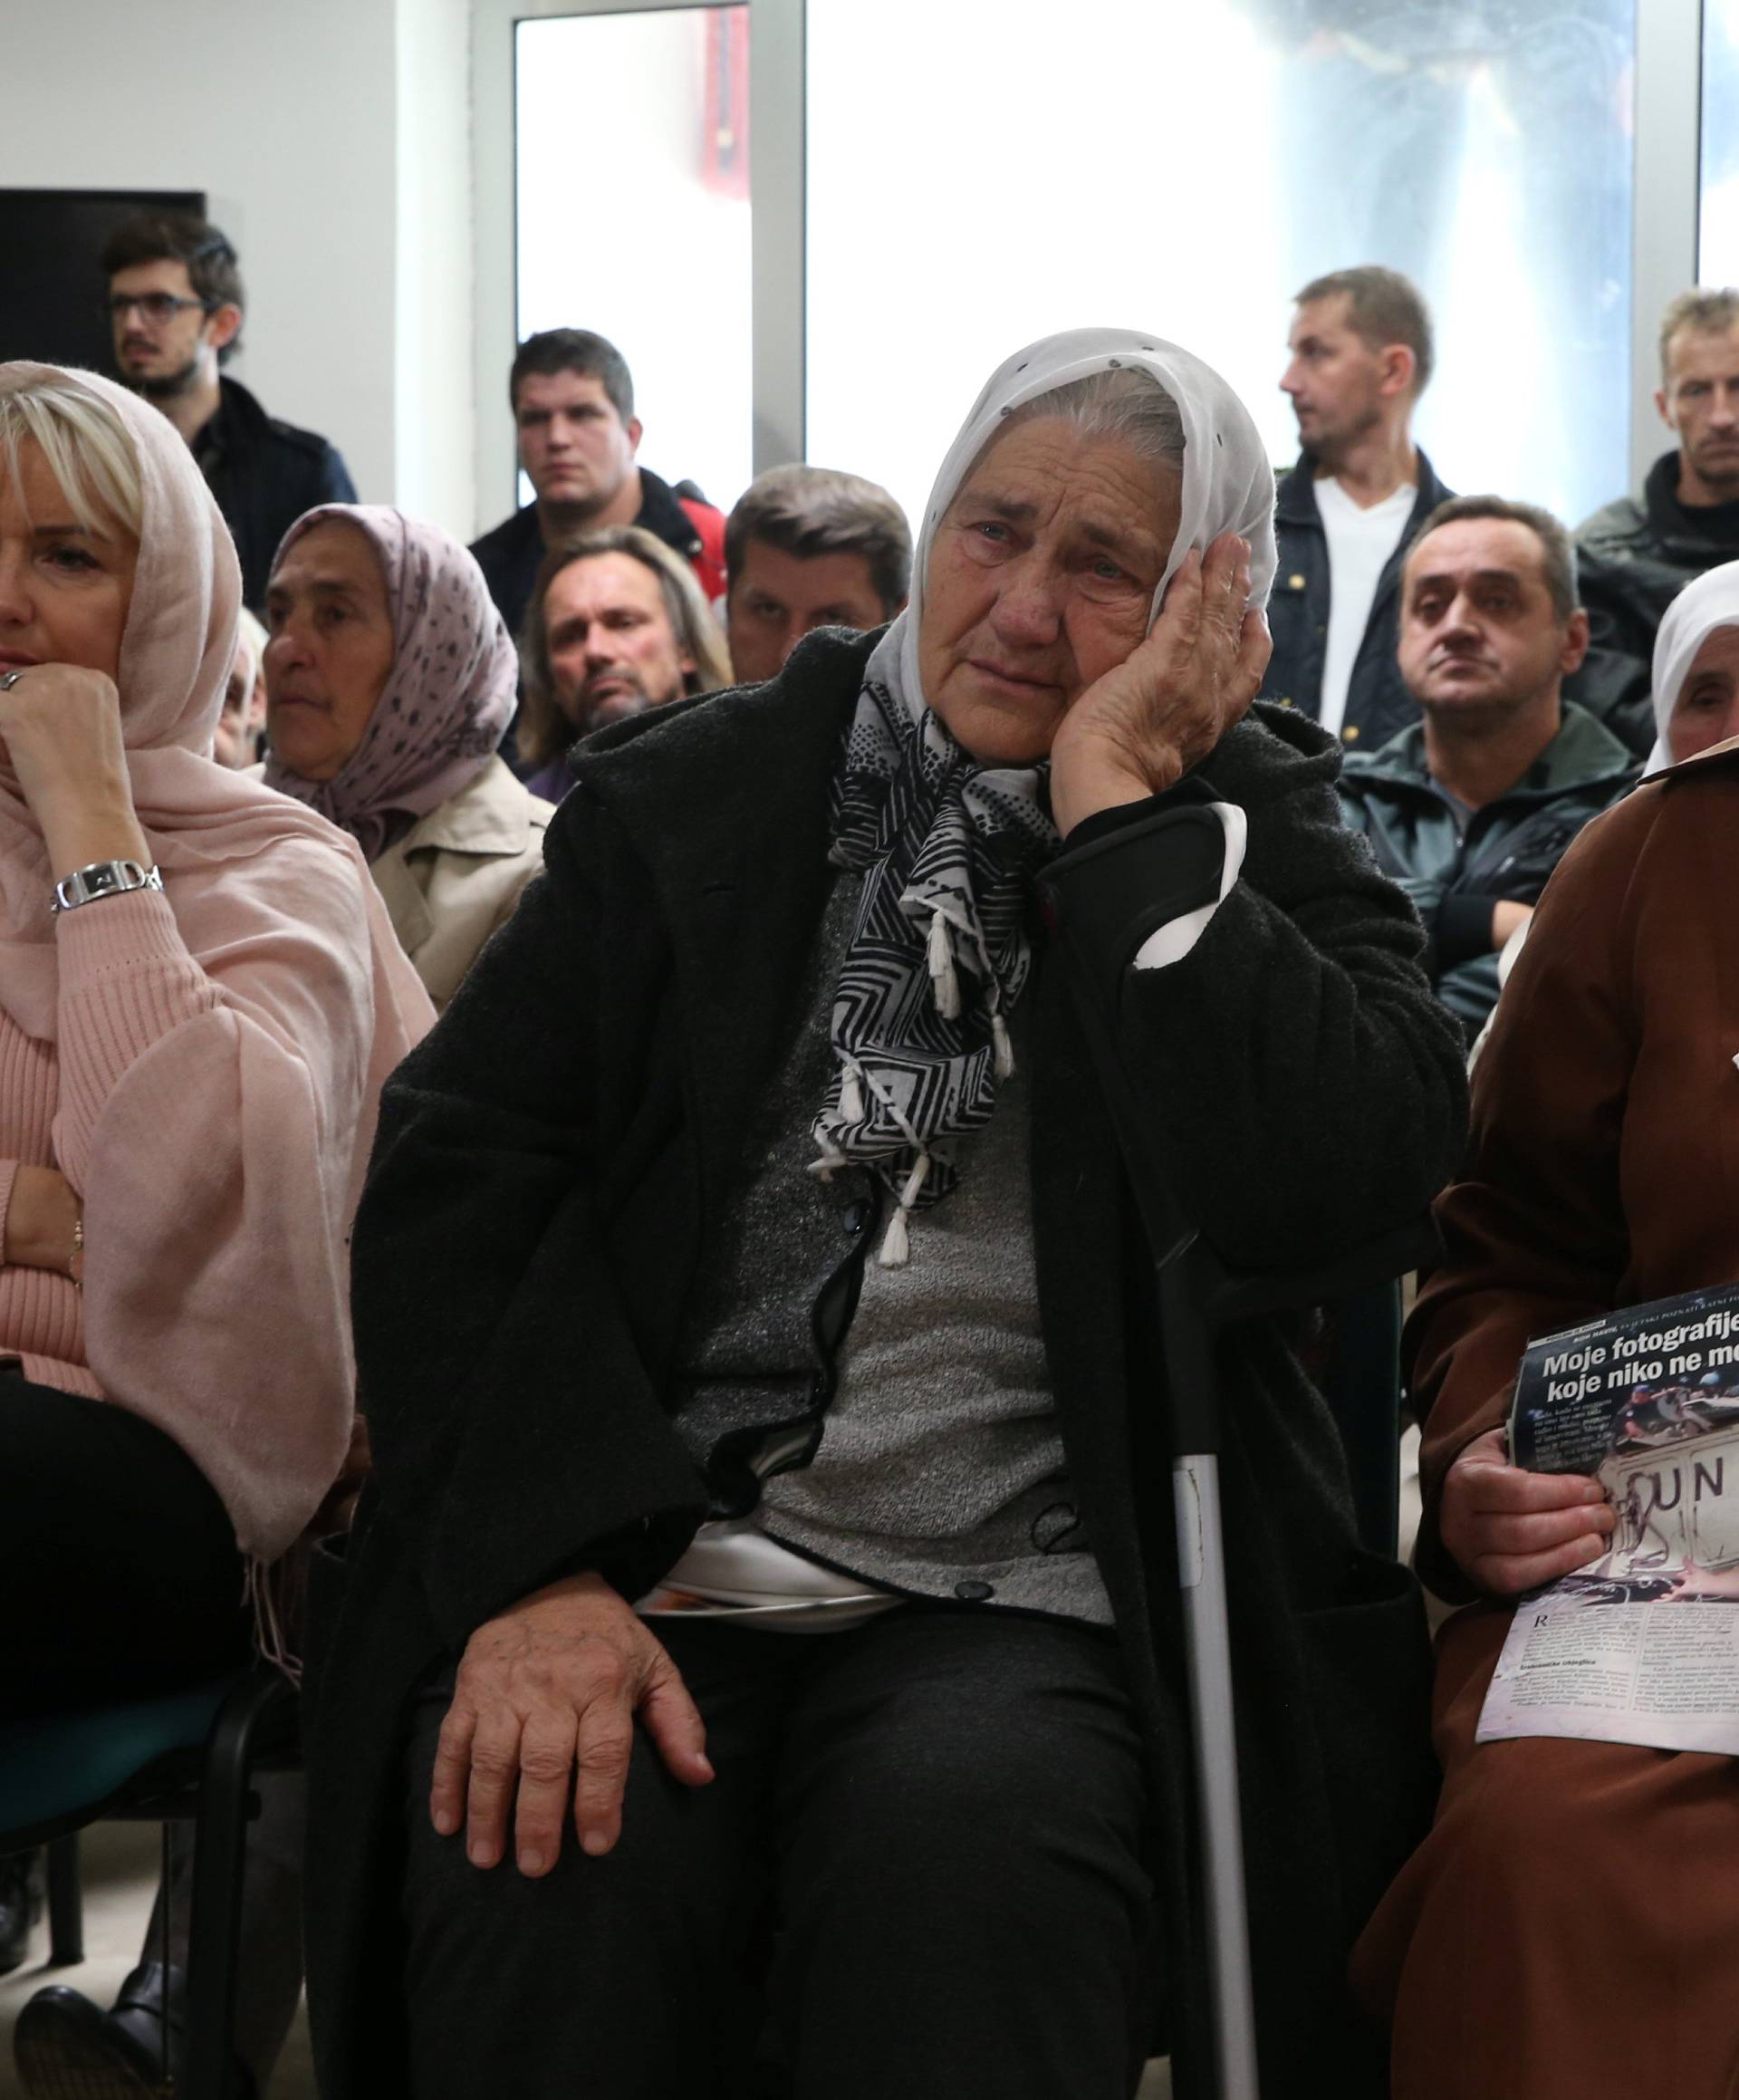 Victims and their family members watch a television broadcast of the court proceedings of former Bosnian Serb general Ratko Mladic in the Memorial centre Potocari near Srebrenica